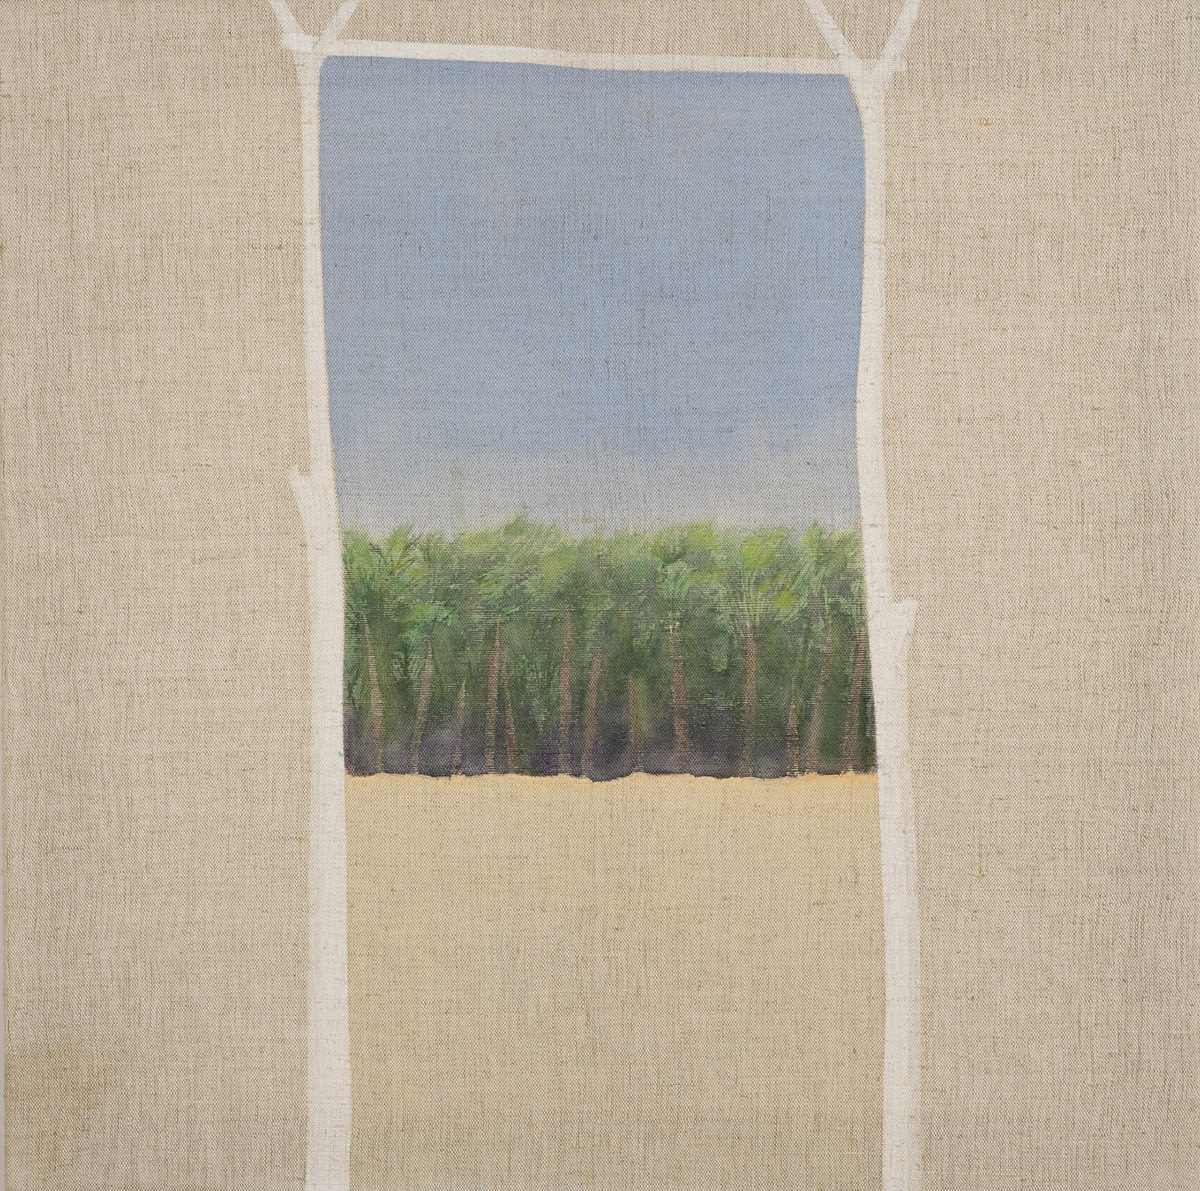 COCONUT GROVE, ZIPOLETE [SIC] 1987 by Patrick Scott HRHA (1921-2014) HRHA (1921-2014) at Whyte's Auctions